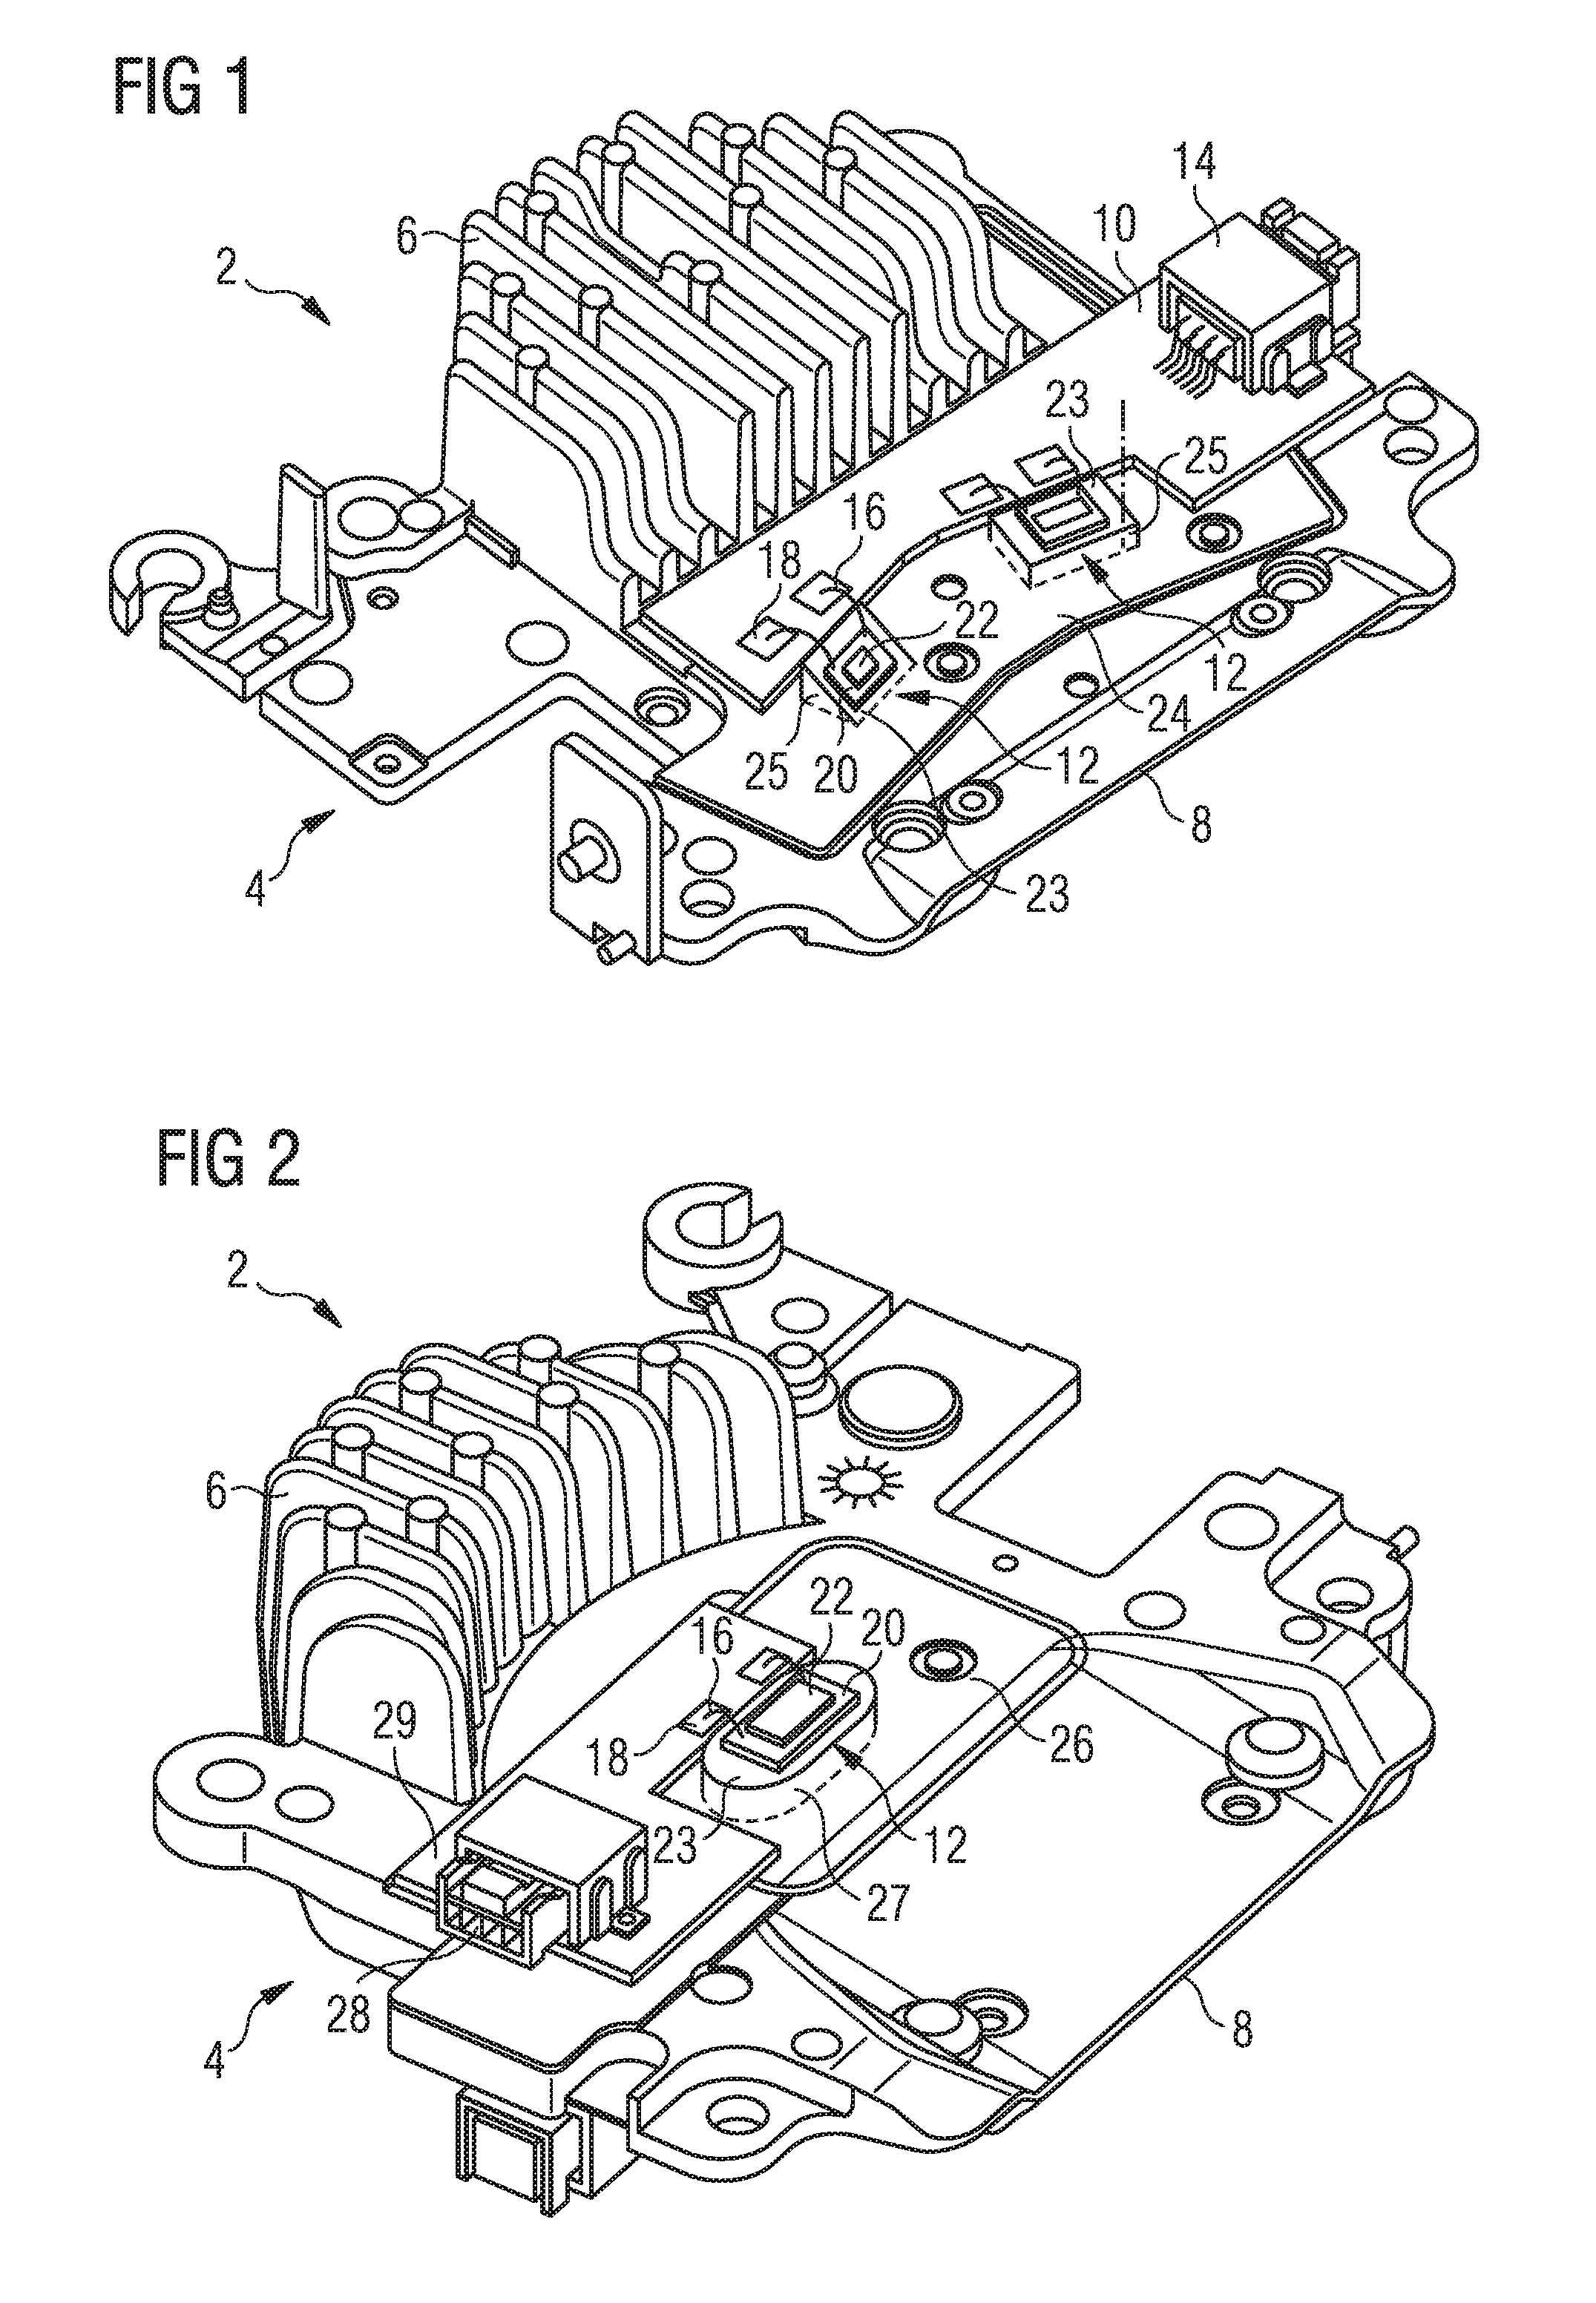 LED support with reception surface and electrical connection by wire-bonding